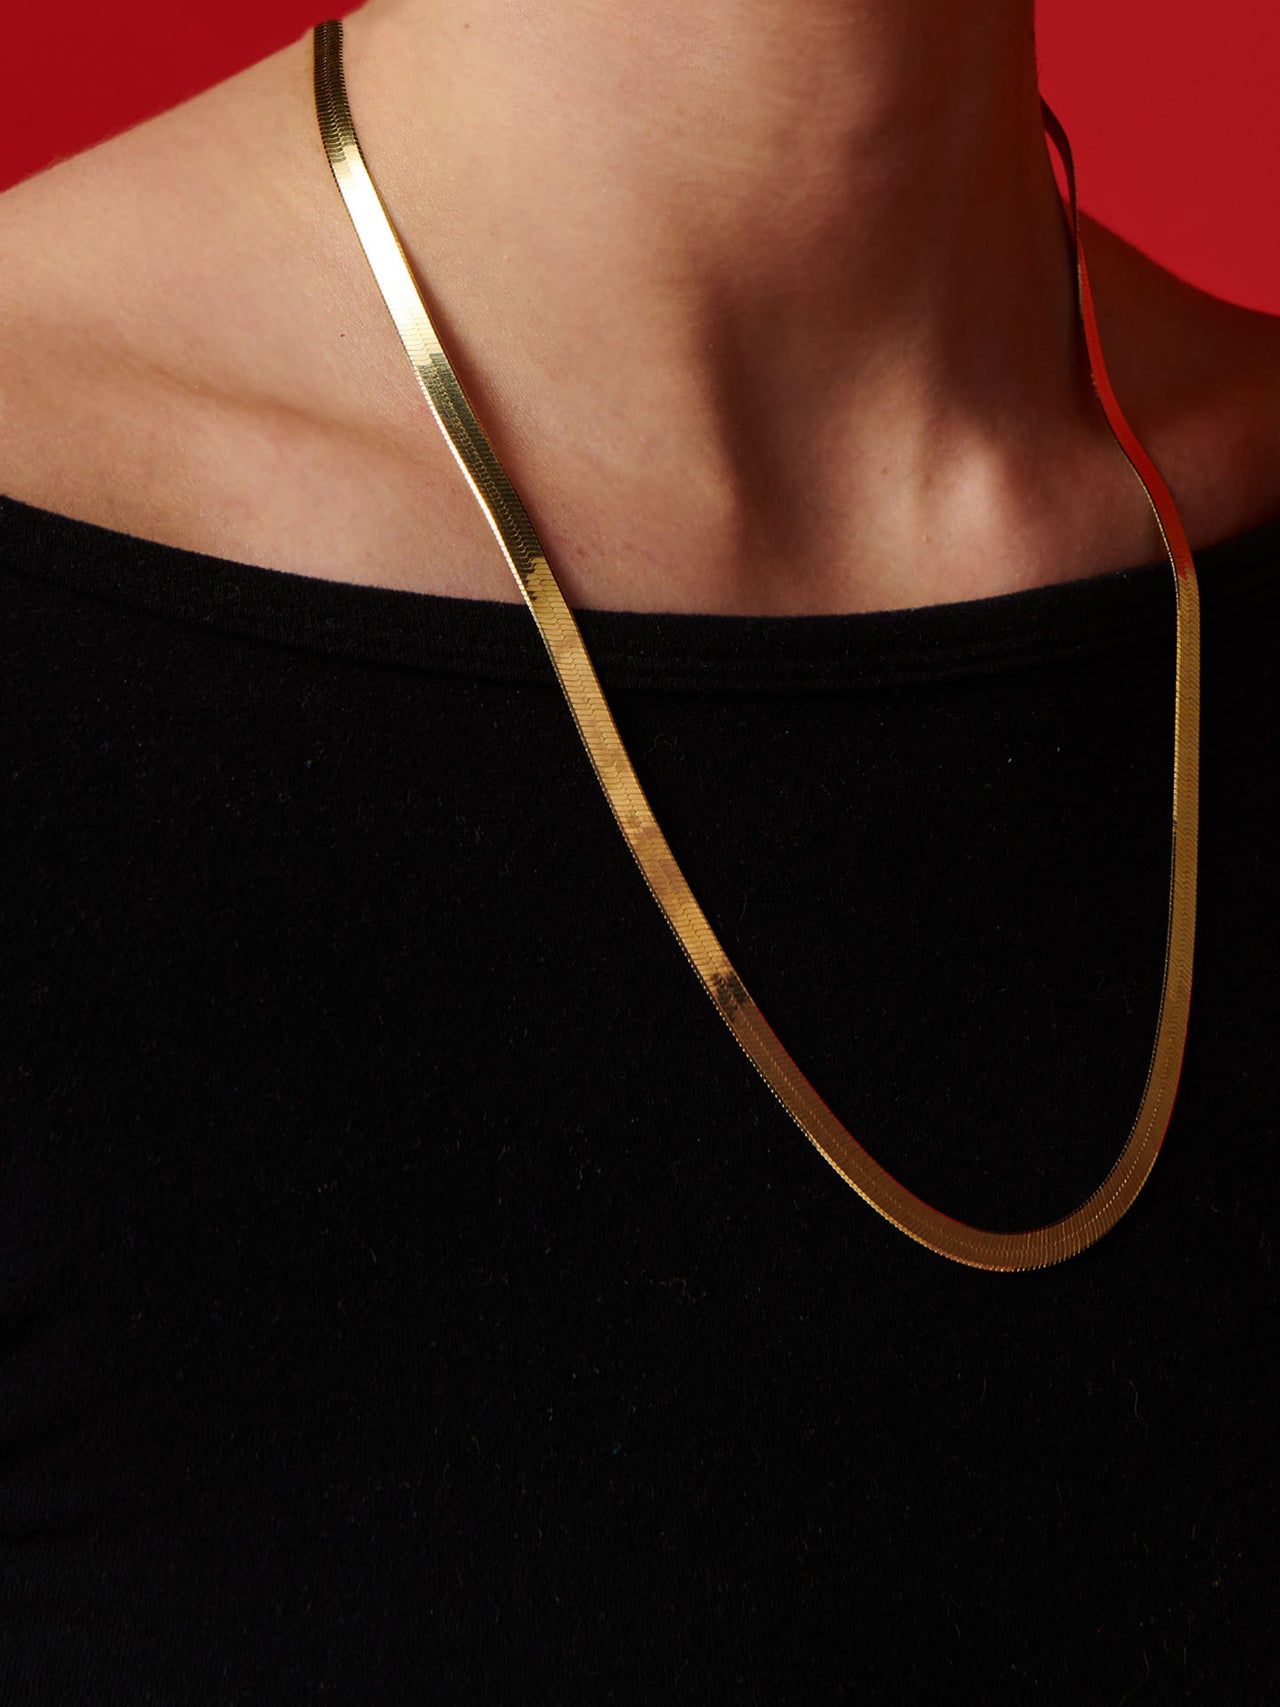 Vermeil Ultra Herringbone Necklace pictured on models neck. Red background. 